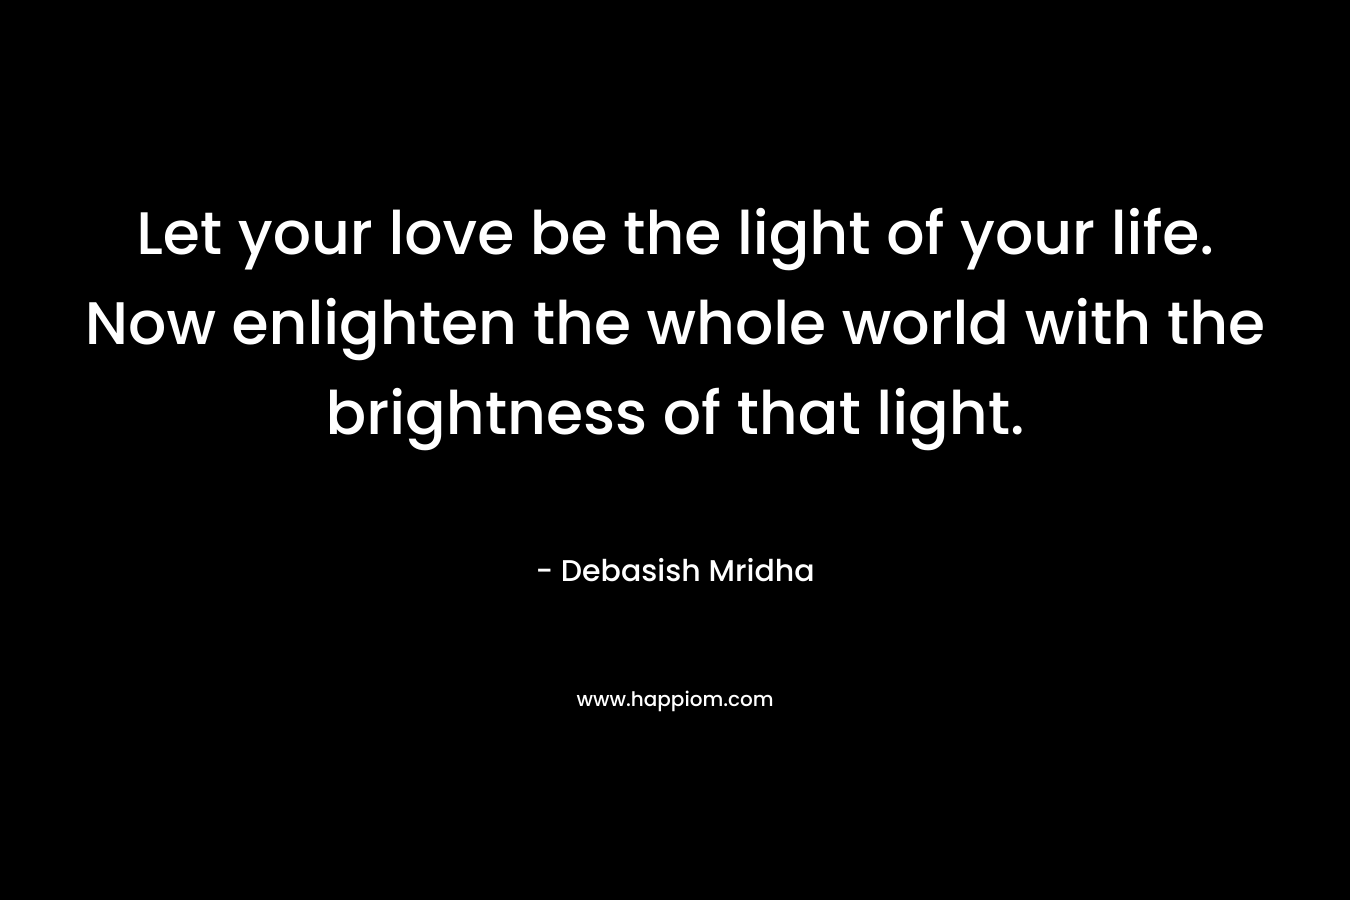 Let your love be the light of your life. Now enlighten the whole world with the brightness of that light.